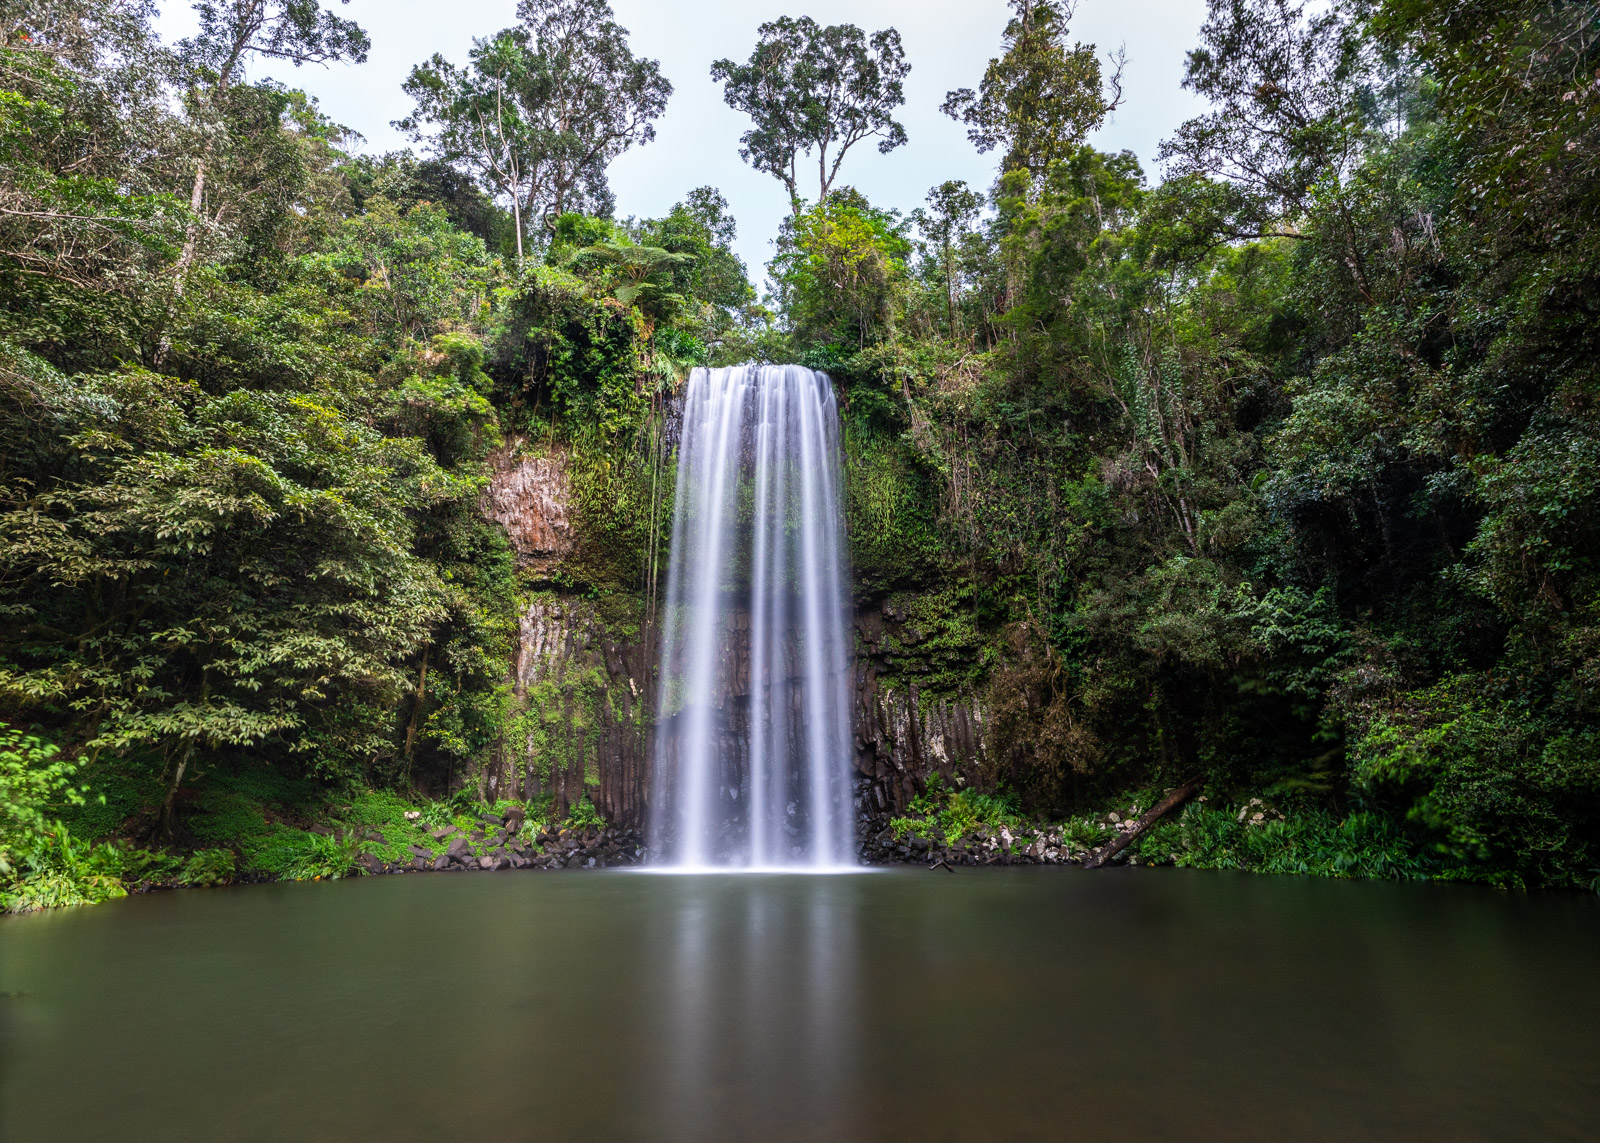 How to photograph silky smooth waterfalls - Photofocus